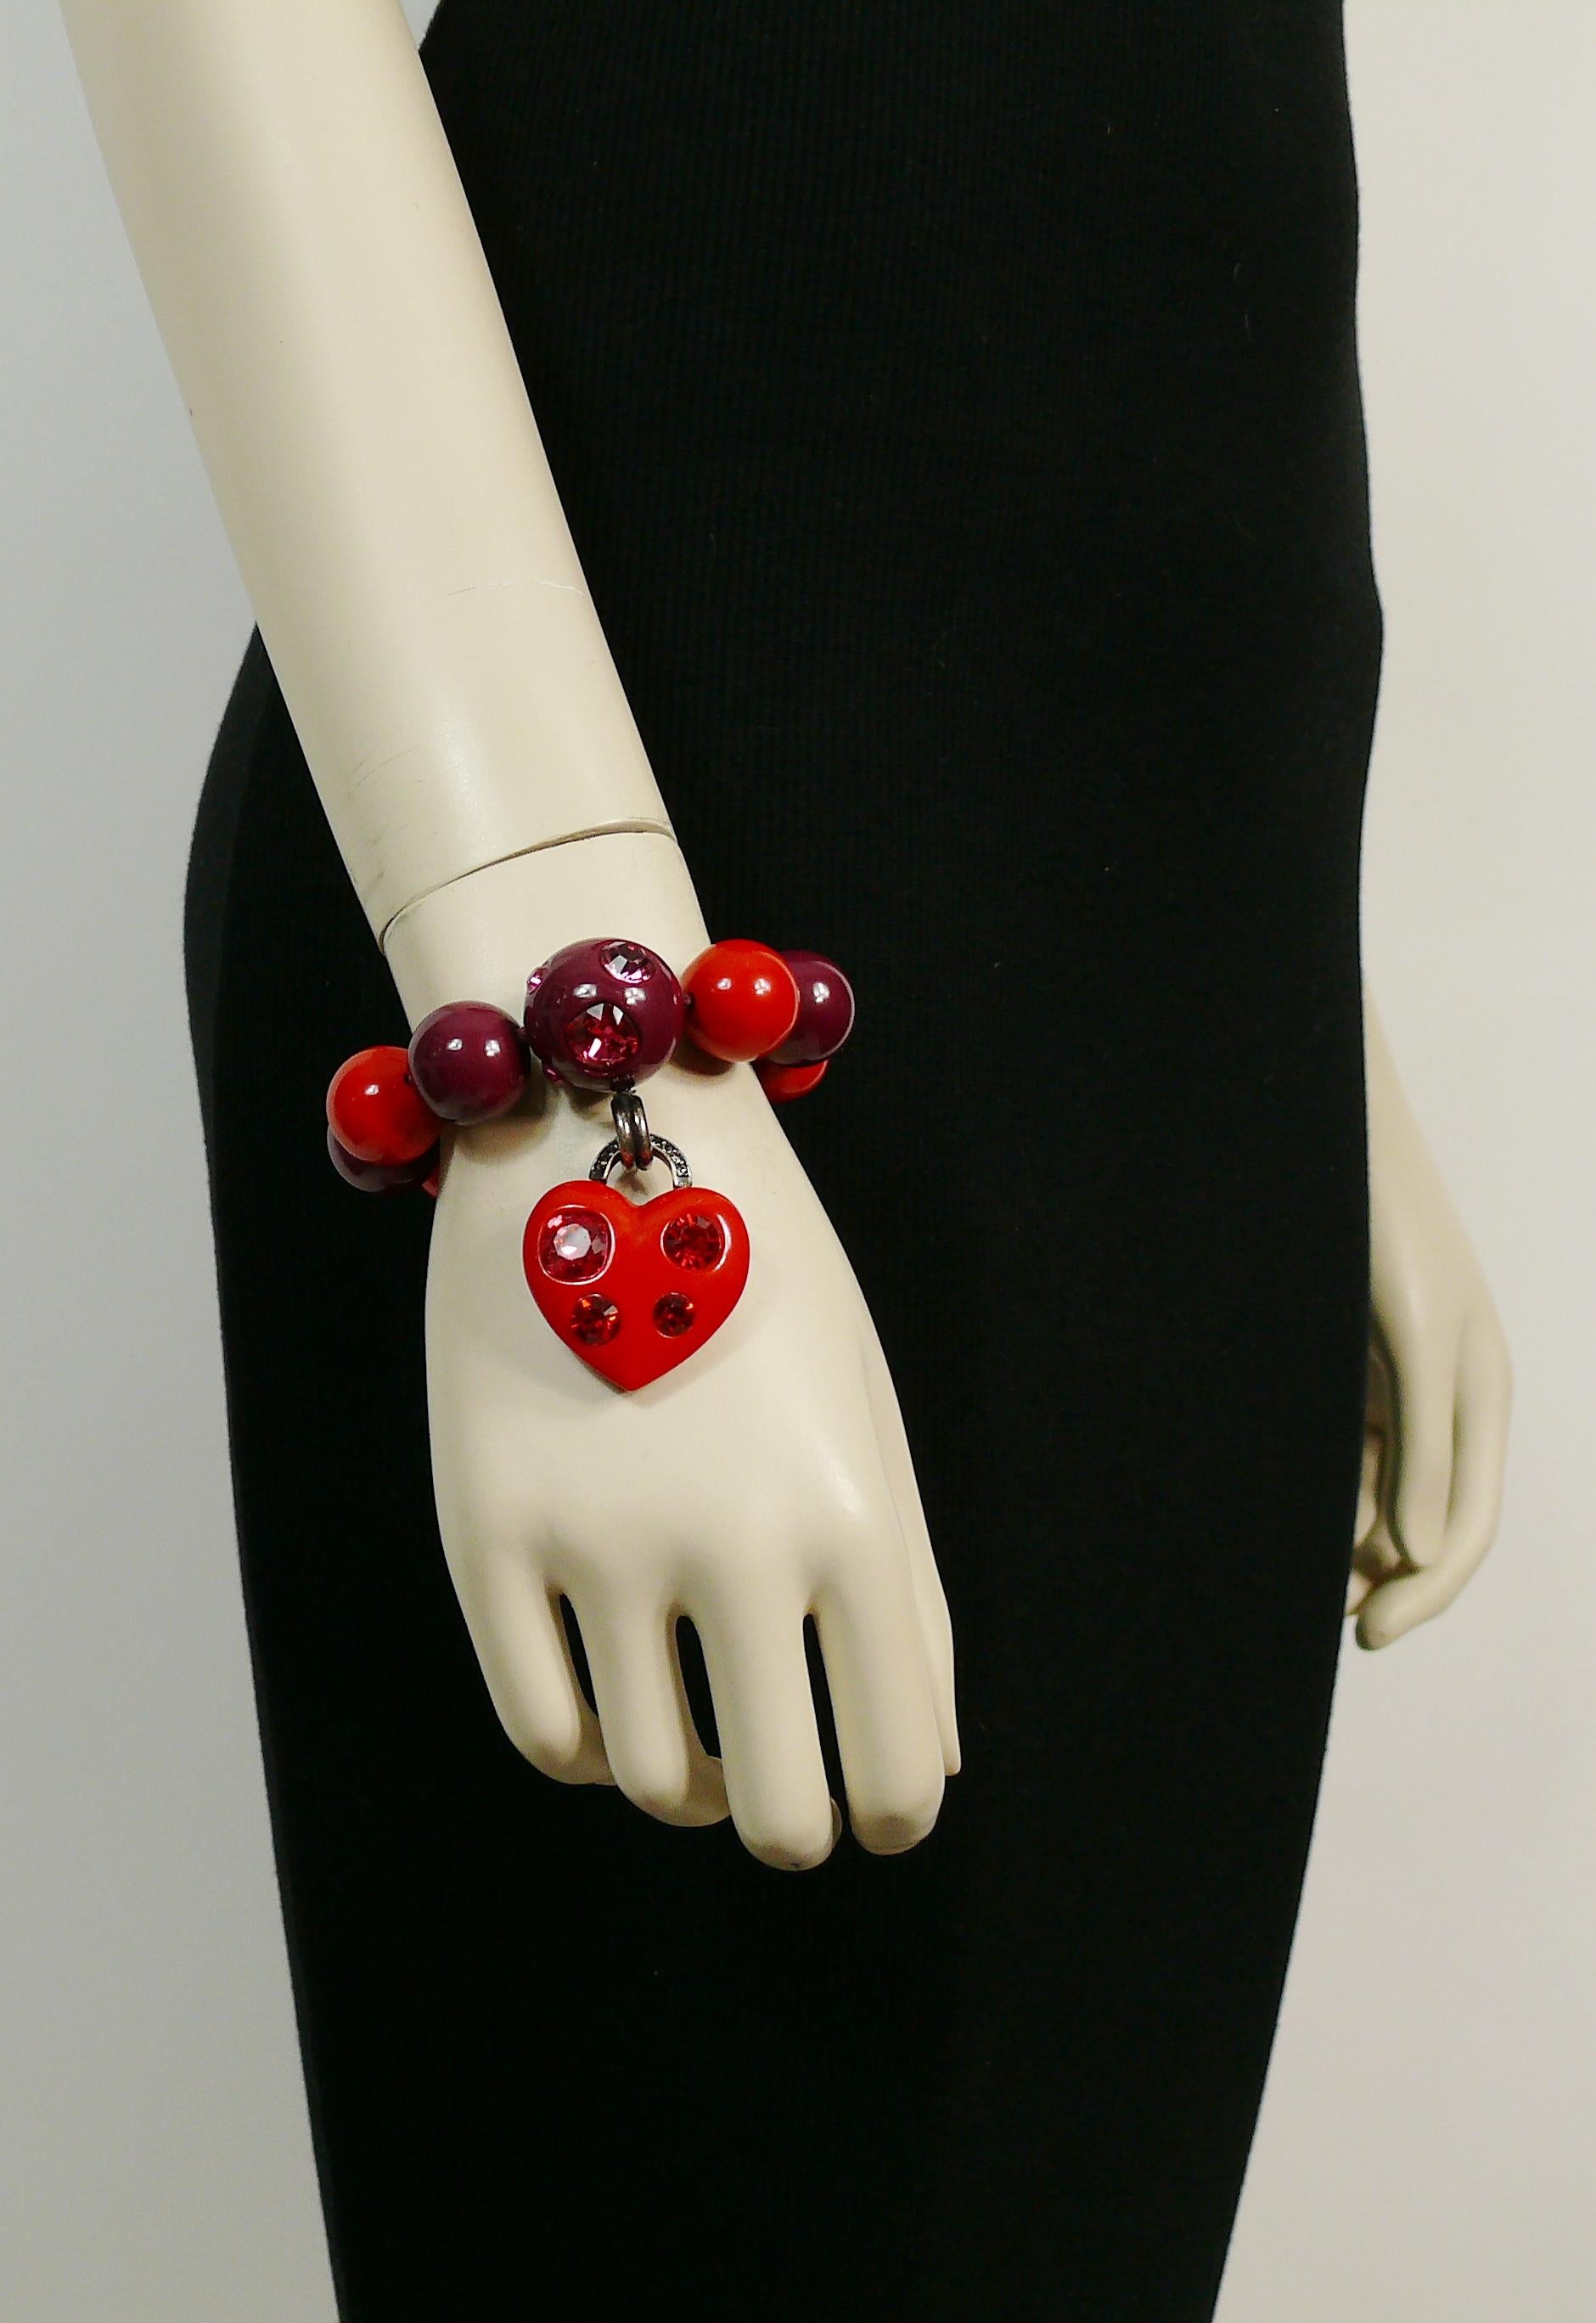 LANVIN heart charm bracelet featuring purple and red resin beads embellished with Swarovski crystals.

Elasticated.
Slips on.

Embossed LANVIN Paris.
Made in Italy.

Indicative measurements : inner circumference (unstretched) approx. 14.15 cm (5.57